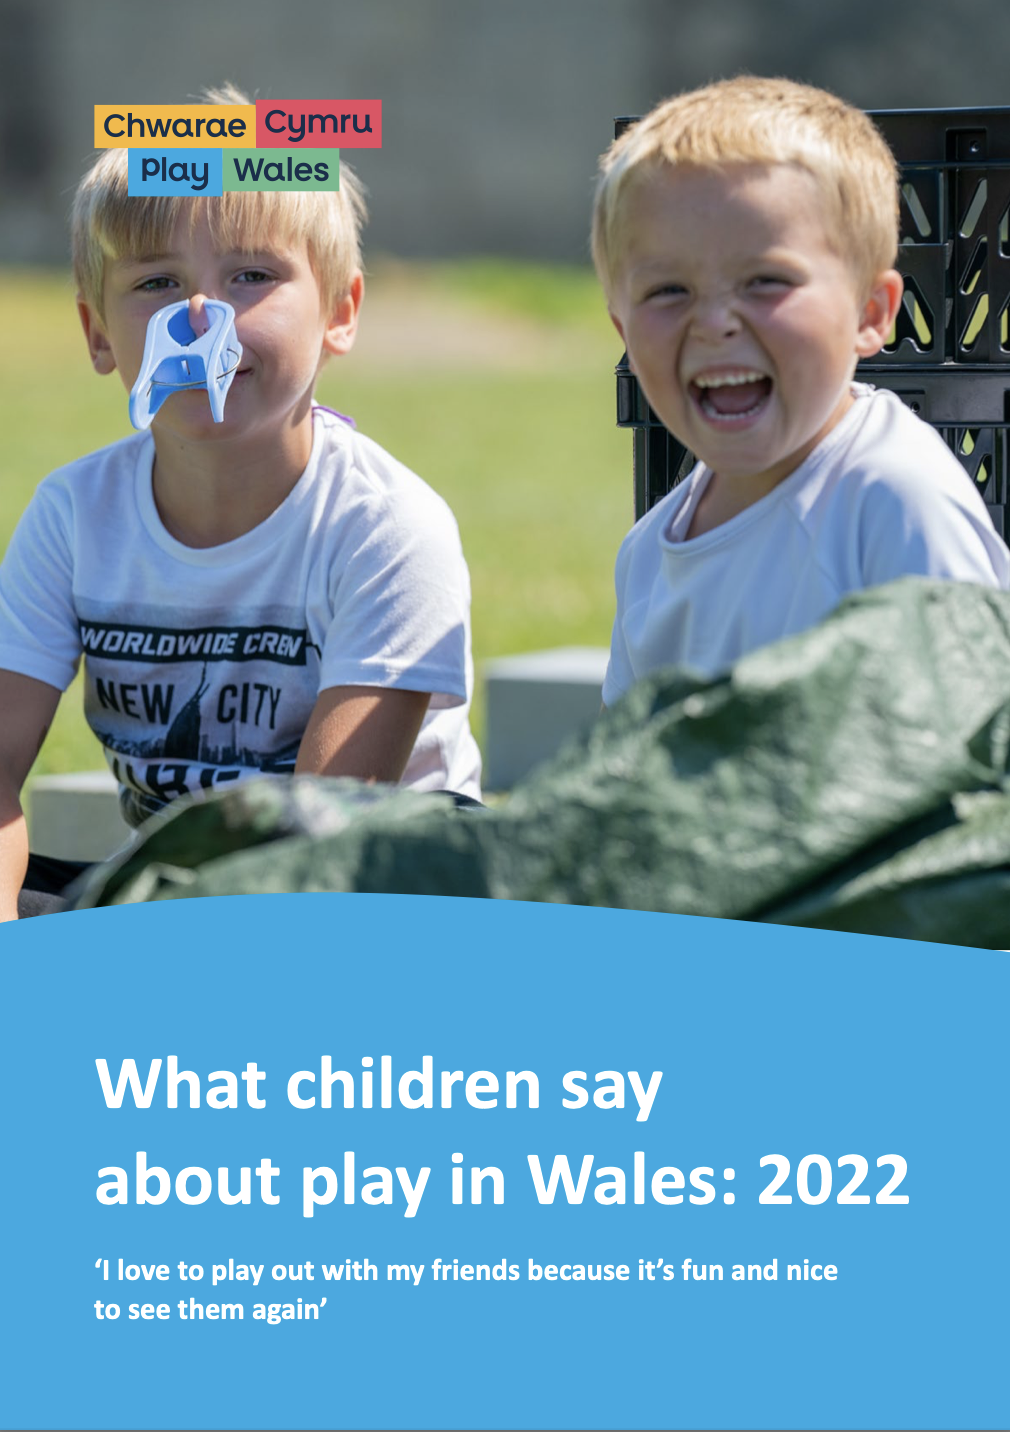 What children say about play in Wales 2022